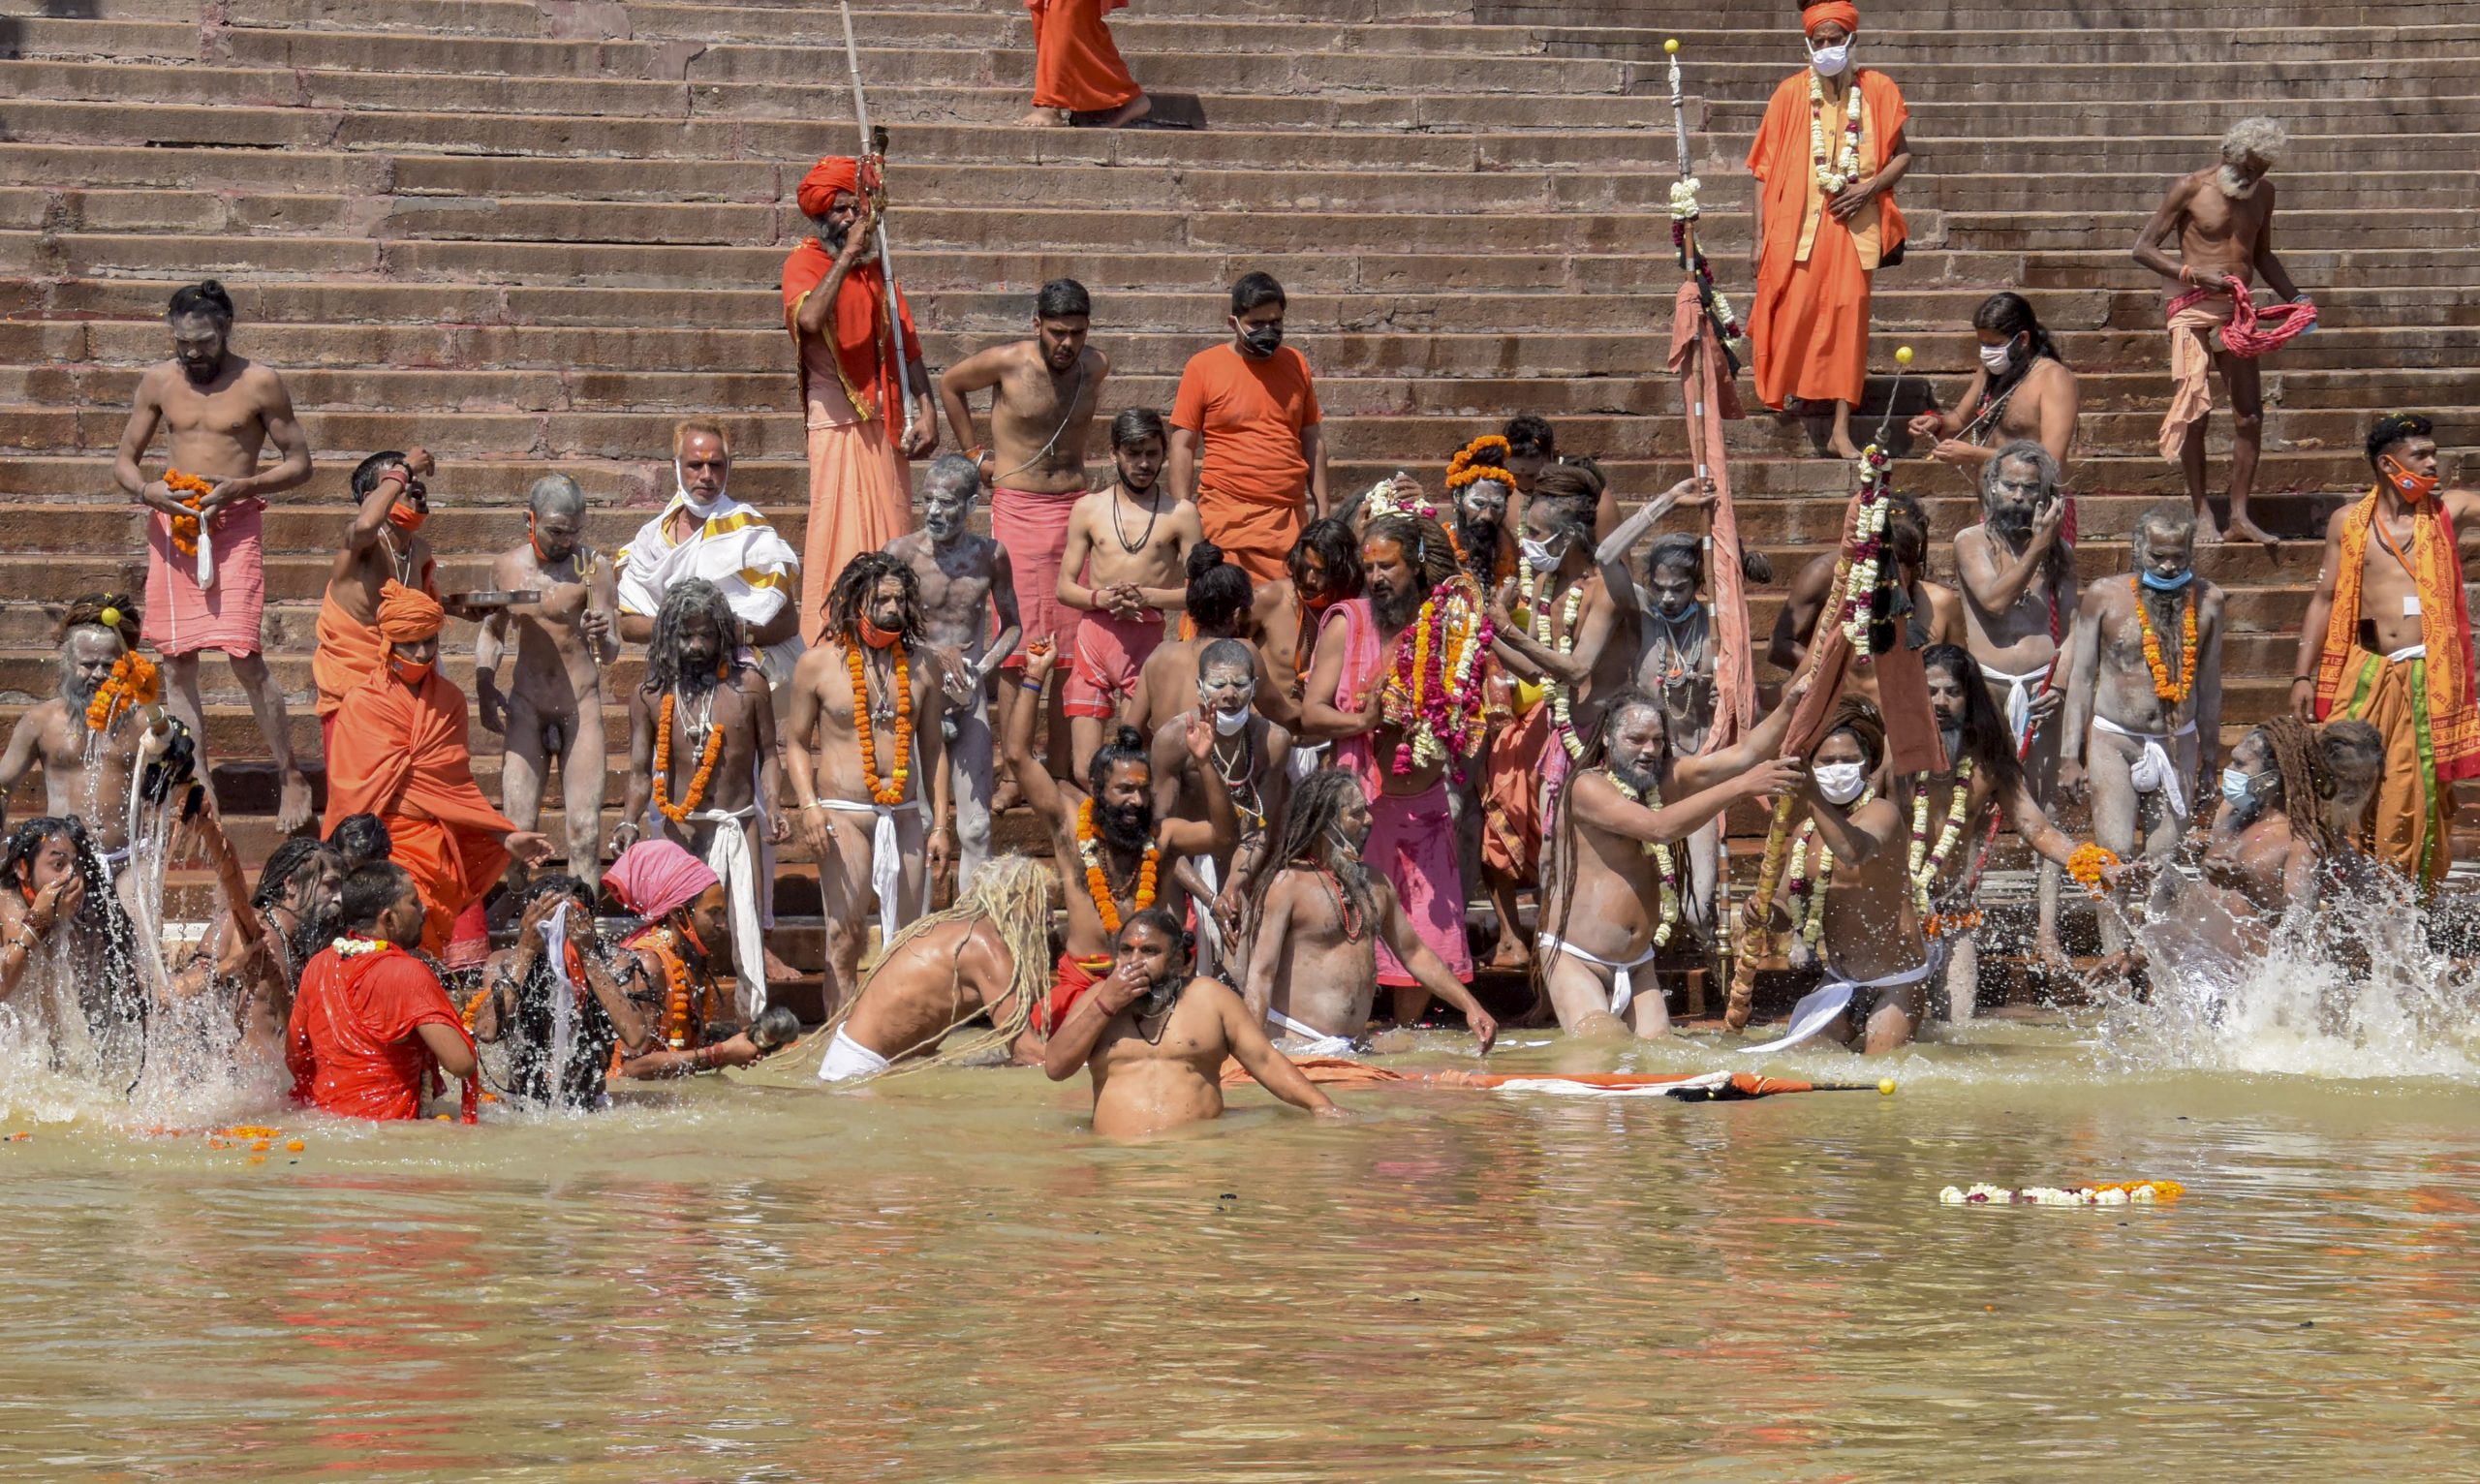 70 lakh devotees participated in Kumbh Mela amid COVID-19 second wave